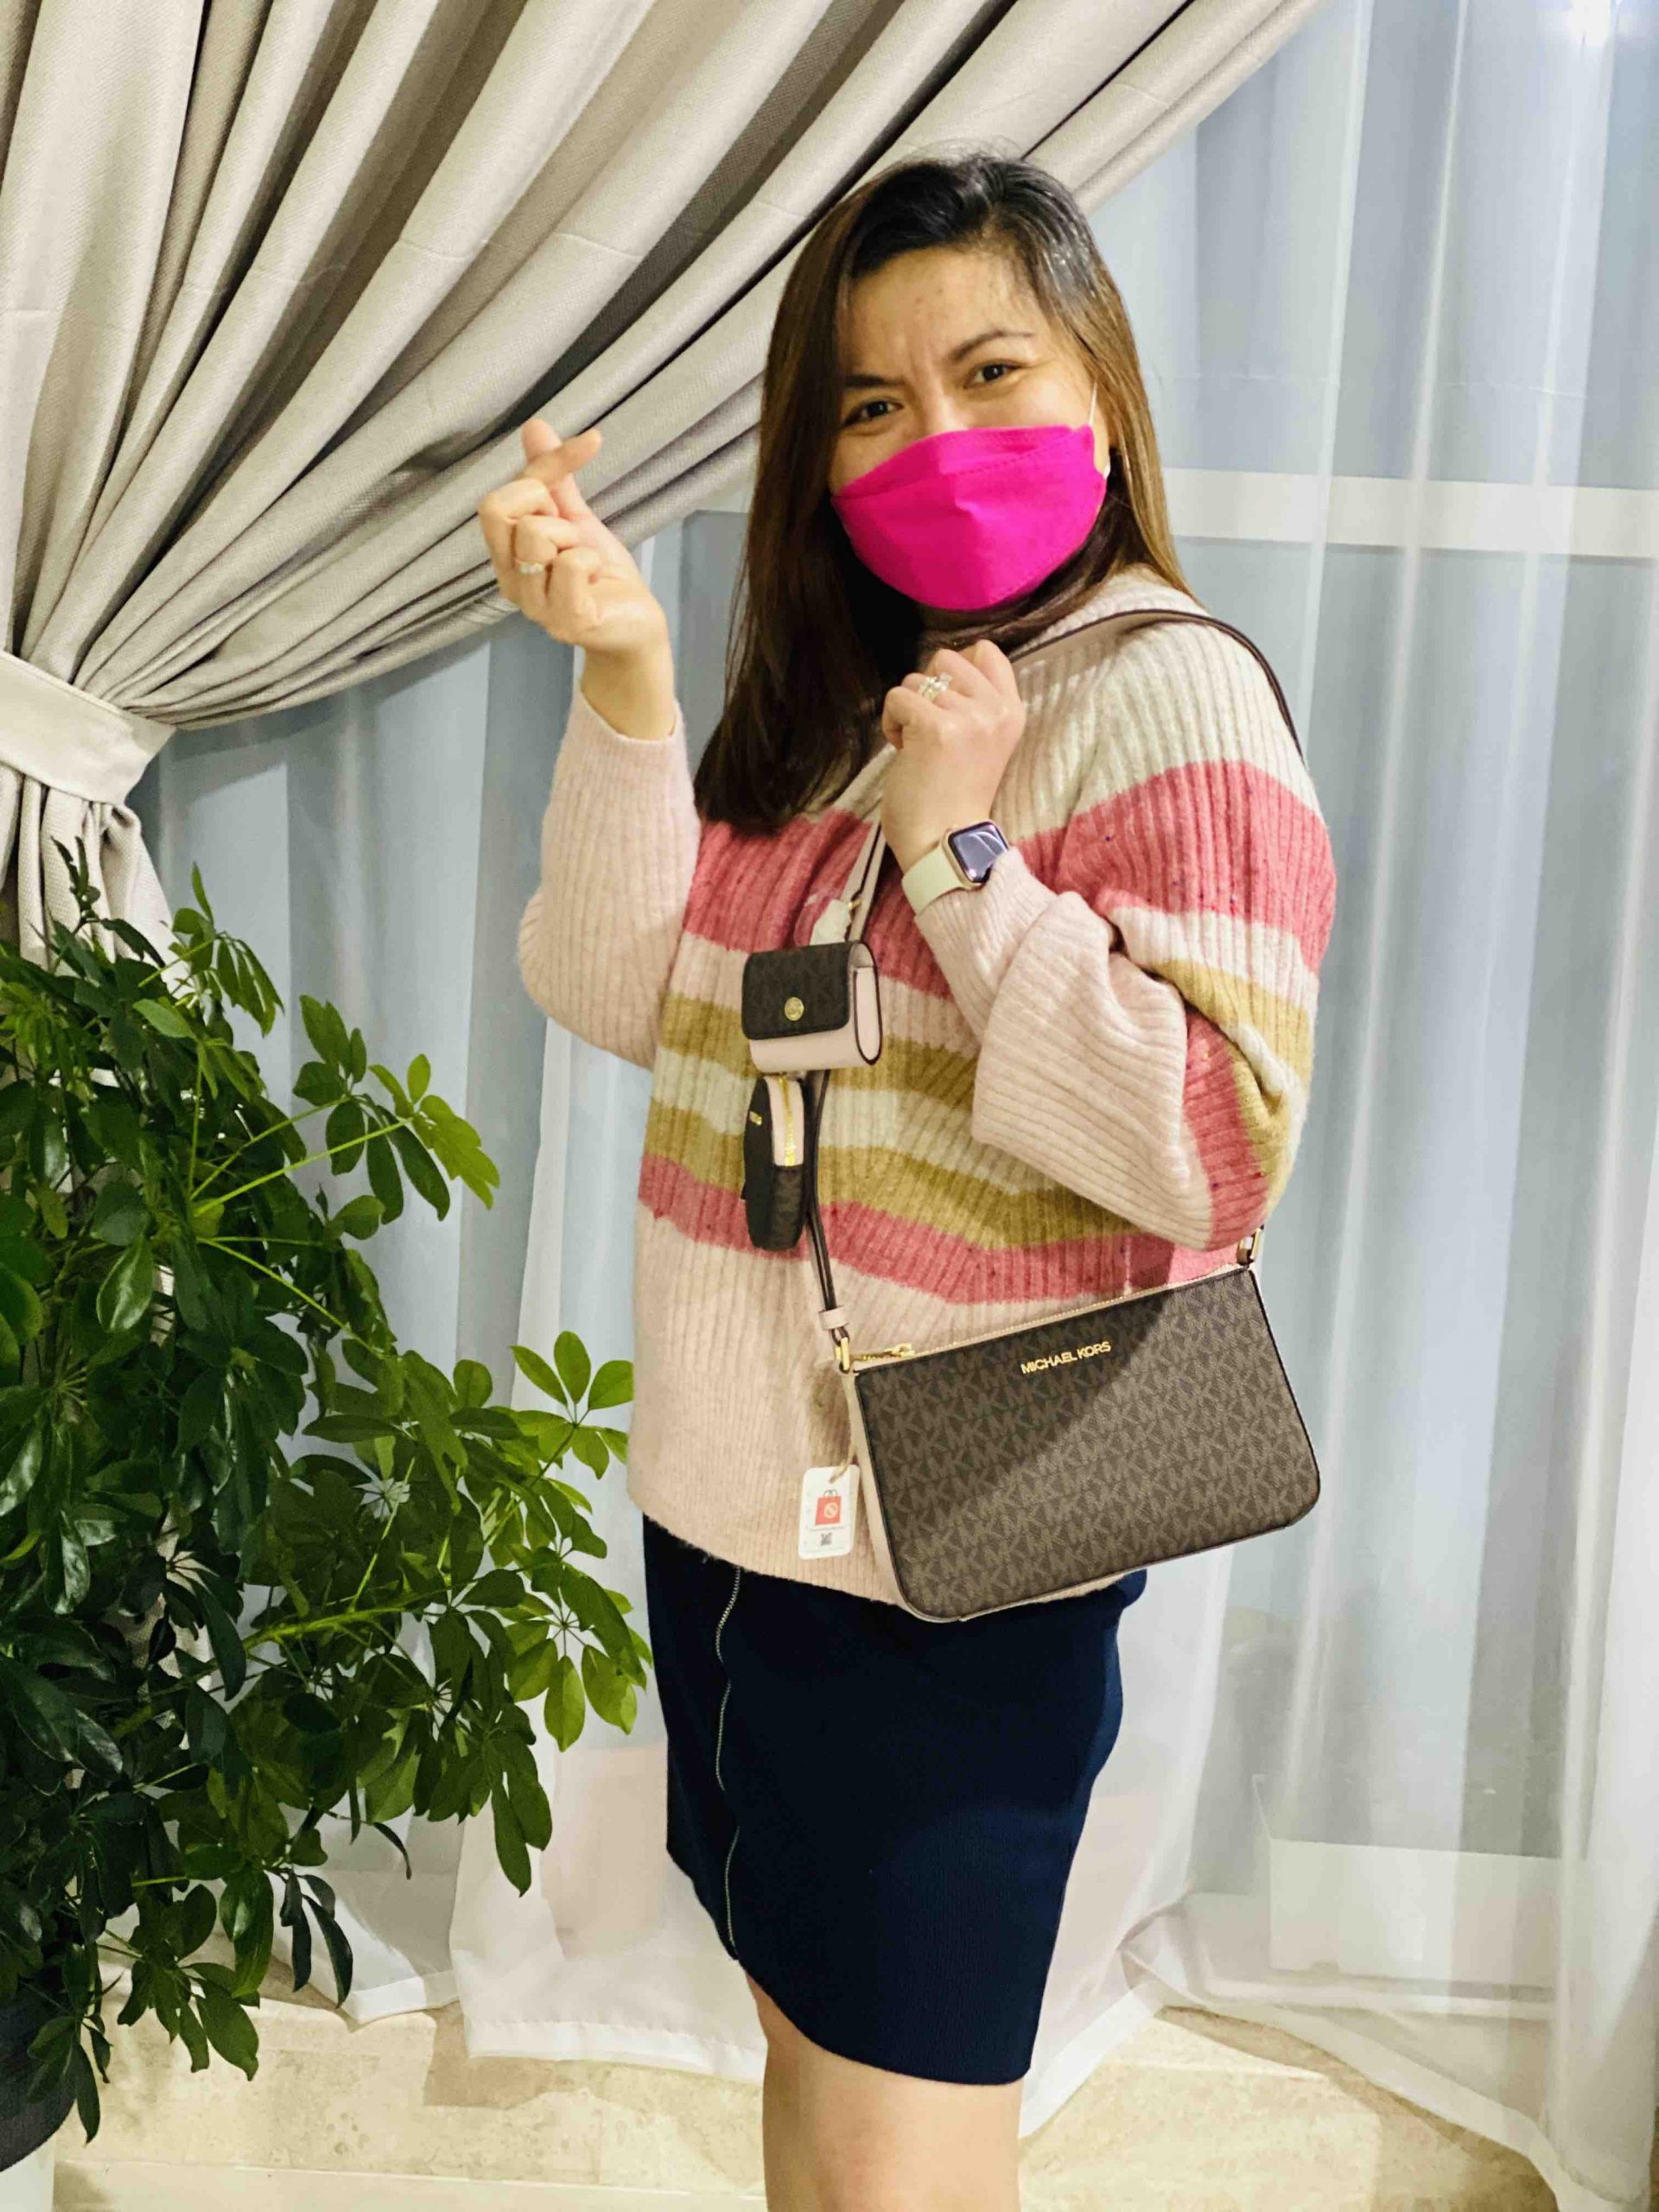 A woman carrying a jet set bag while doing a finger heart